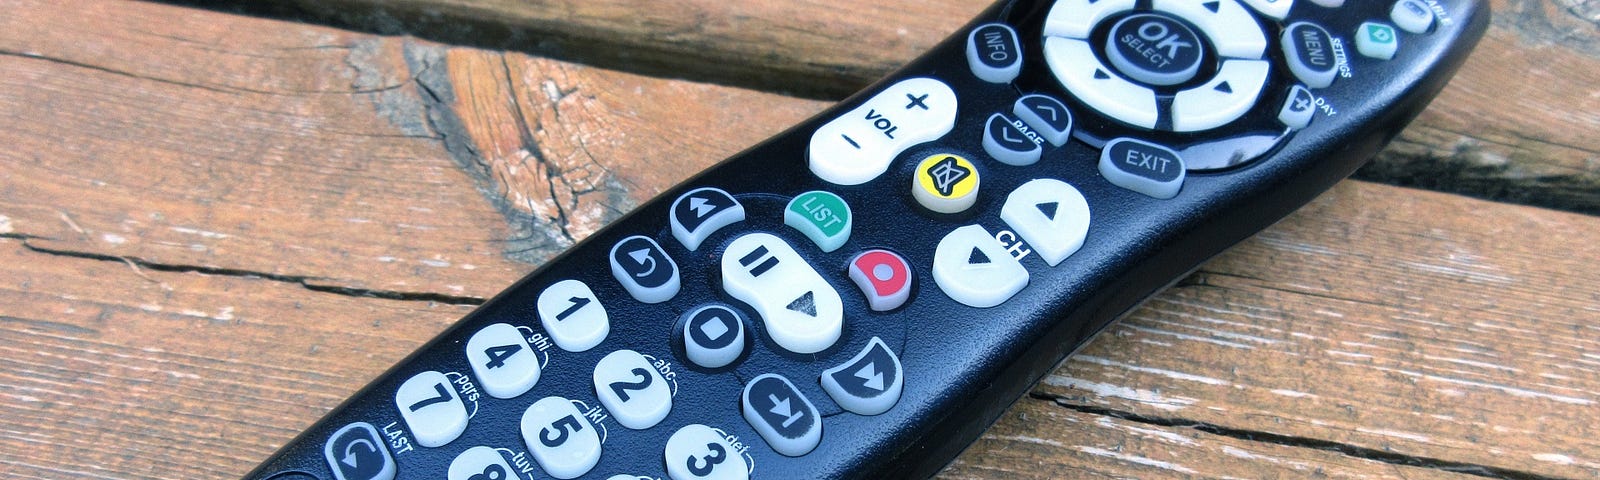 A modern TV remote control sitting diagonally across rough wooden boards.